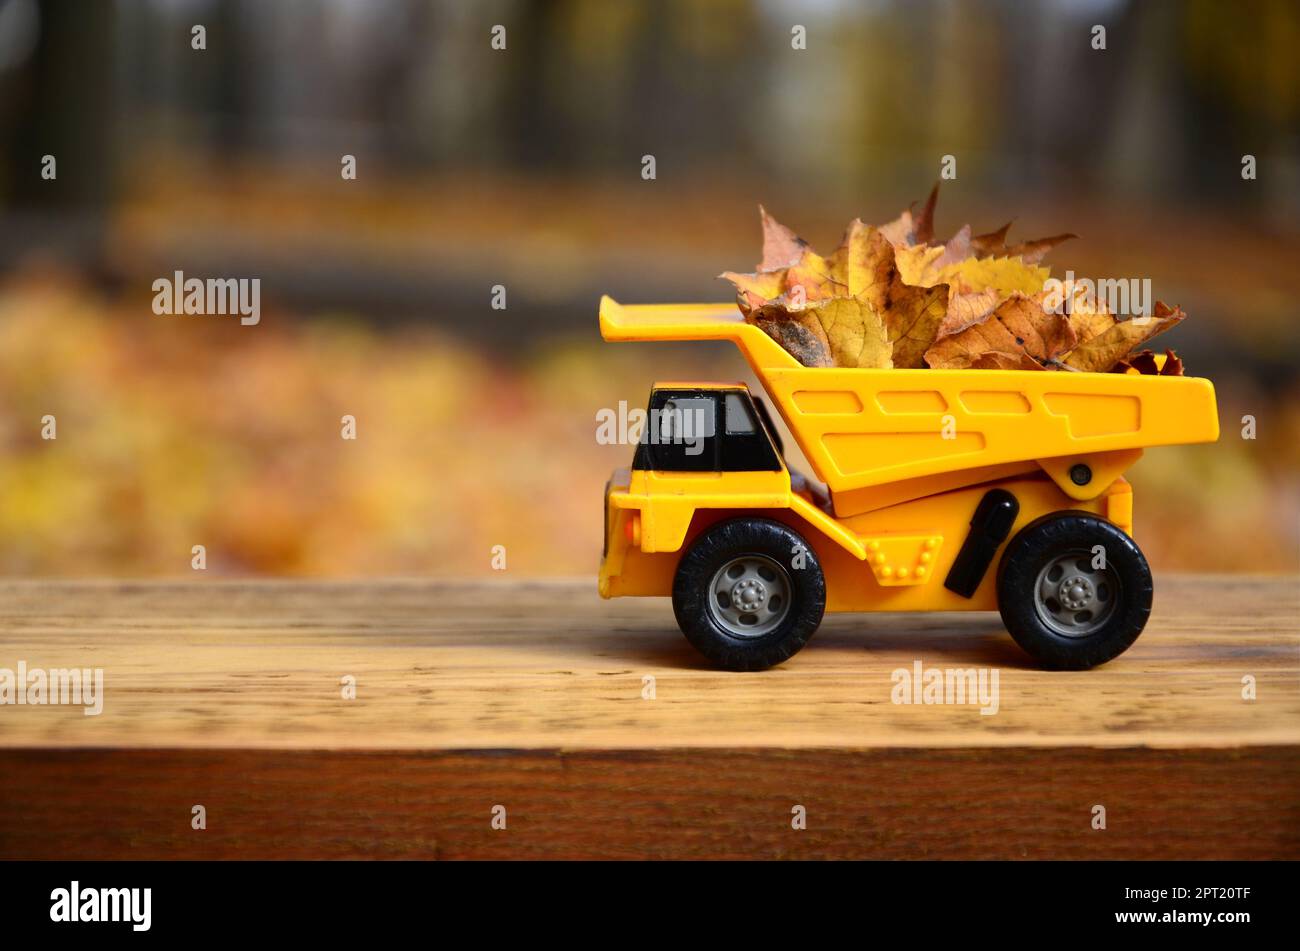 A small toy yellow truck is loaded with yellow fallen leaves. The car stands on a wooden surface against a background of a blurry autumn park. Cleanin Stock Photo